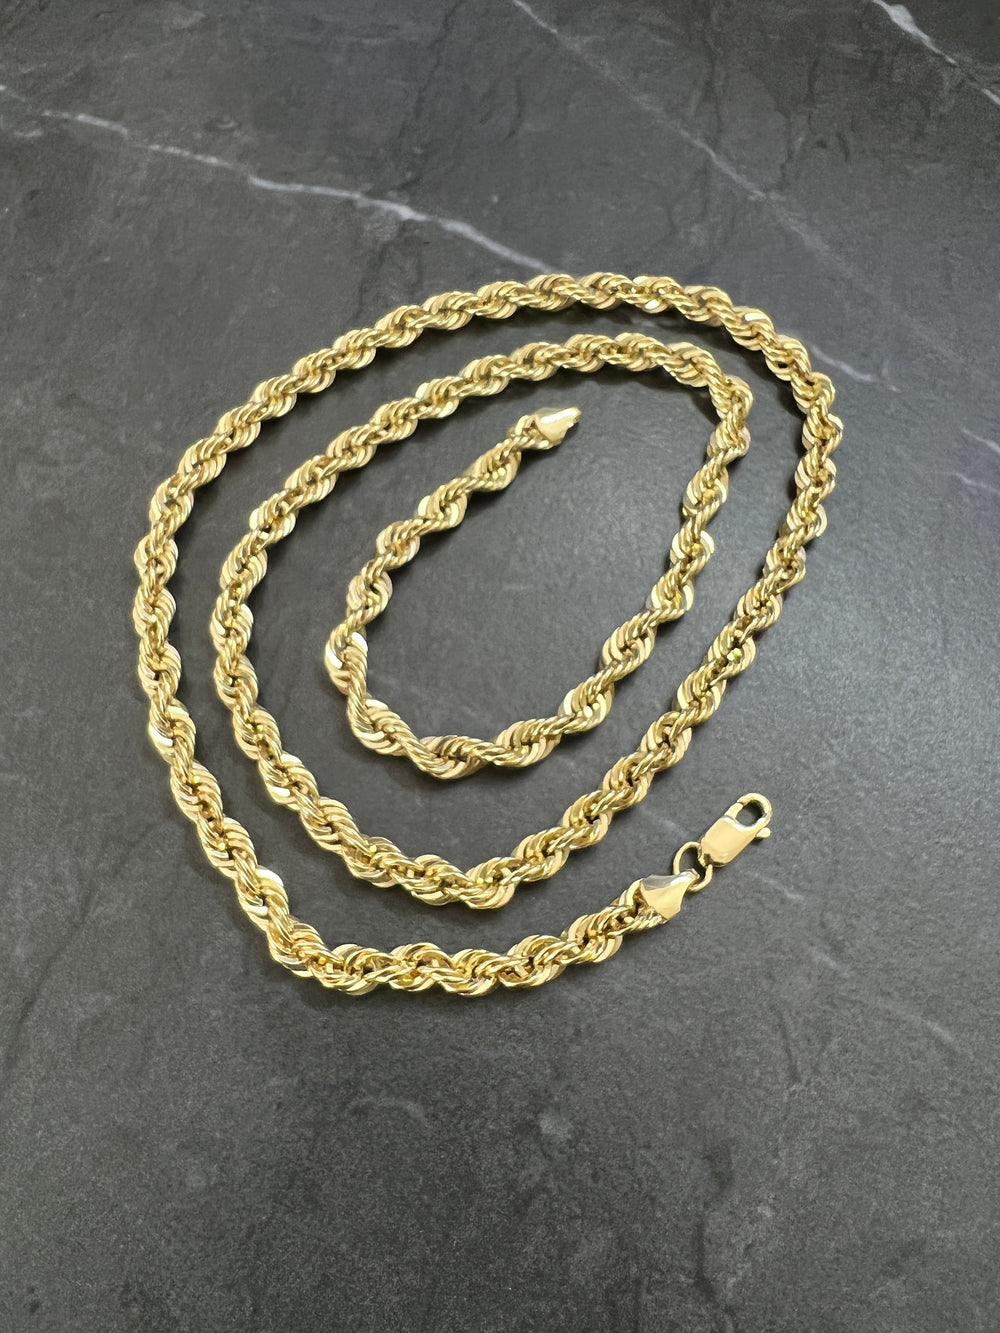 5mm Solid 10K Yellow Gold .925 Sterling Silver Rope Chain Gold Necklace 5mm 20"-28", Gold Rope Chain for Men and Women, Diamond Cut 10K Rope